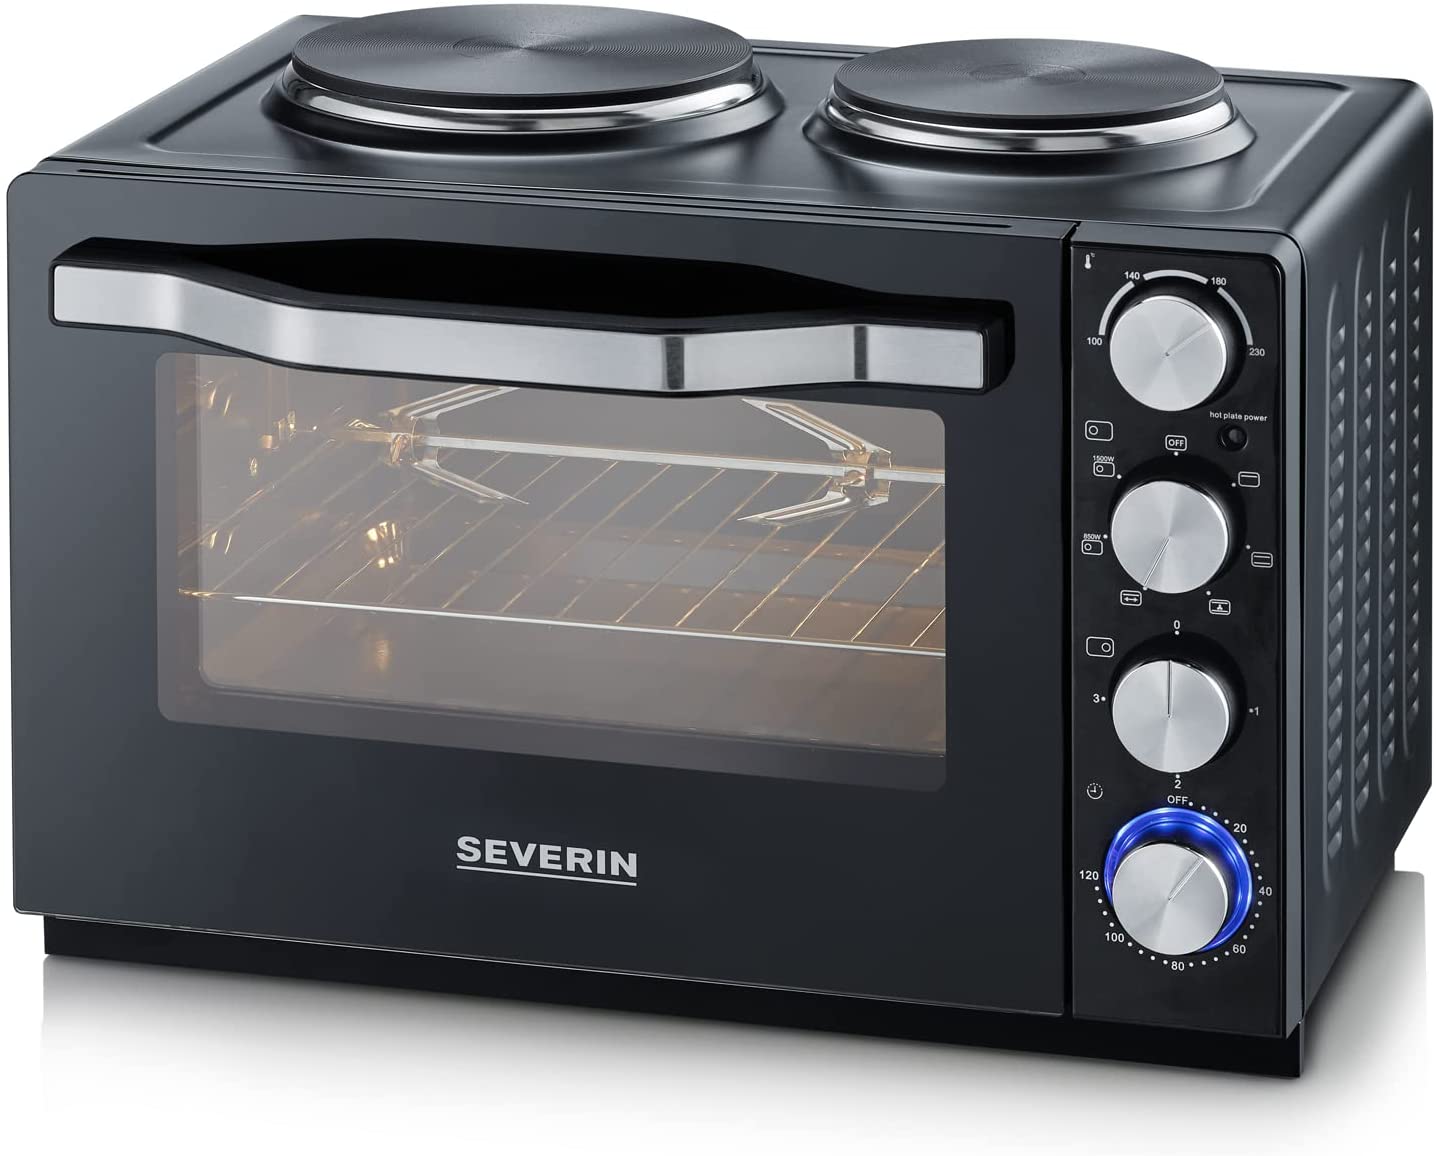 SEVERIN Oven and toast oven with hobs, oven with 30 L cooking chamber capacity, mini oven with hot plates for cooking, grilling and baking, total power 2500 W, black, TO 2074